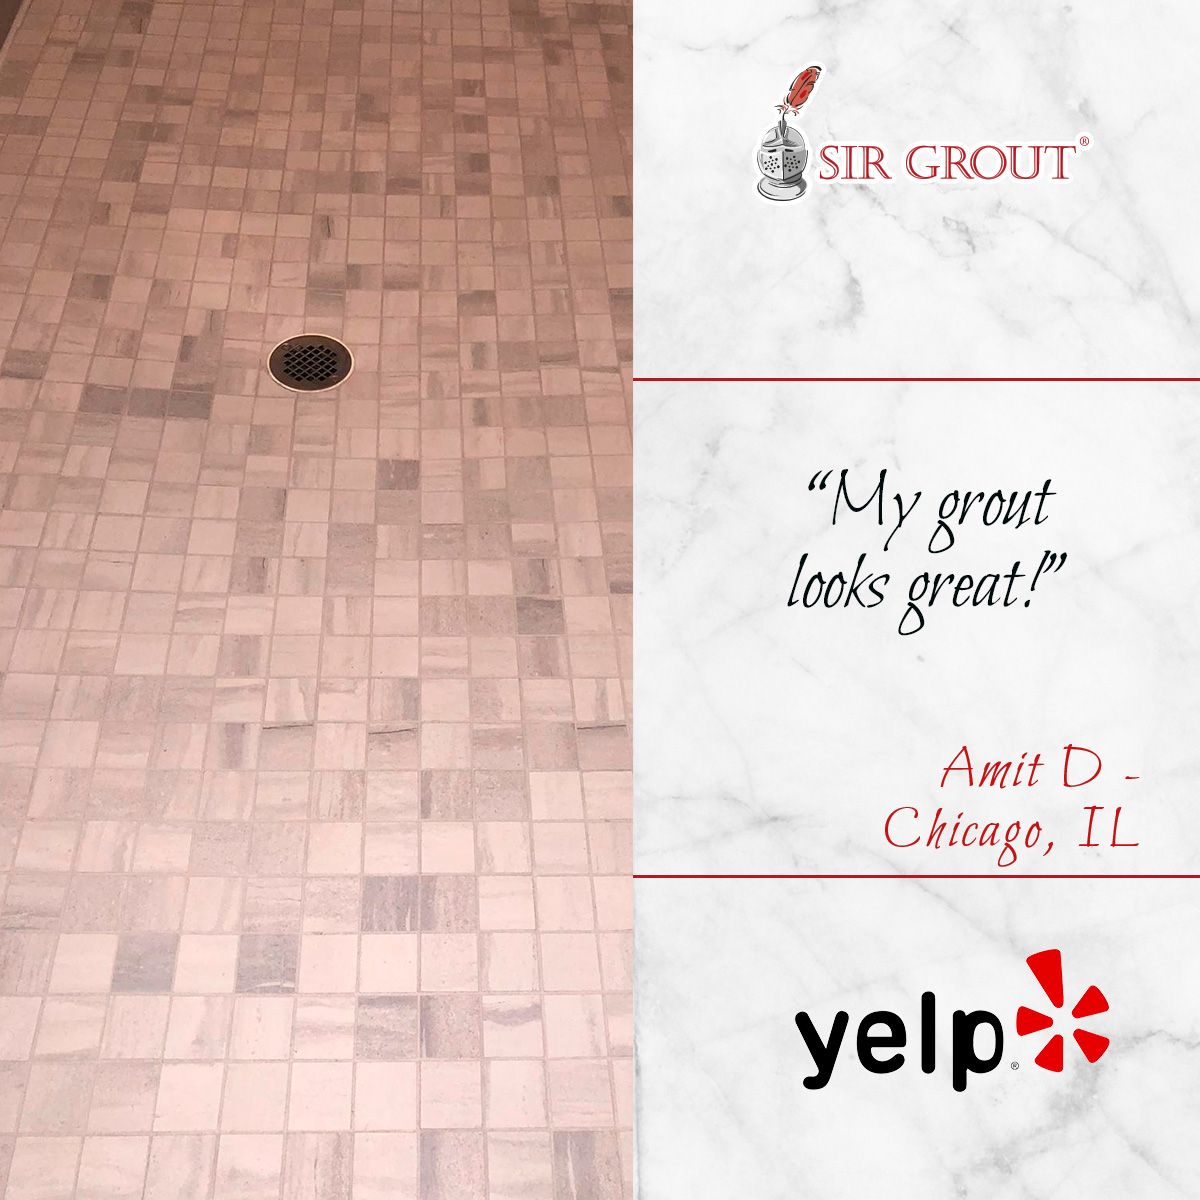 My grout looks great!